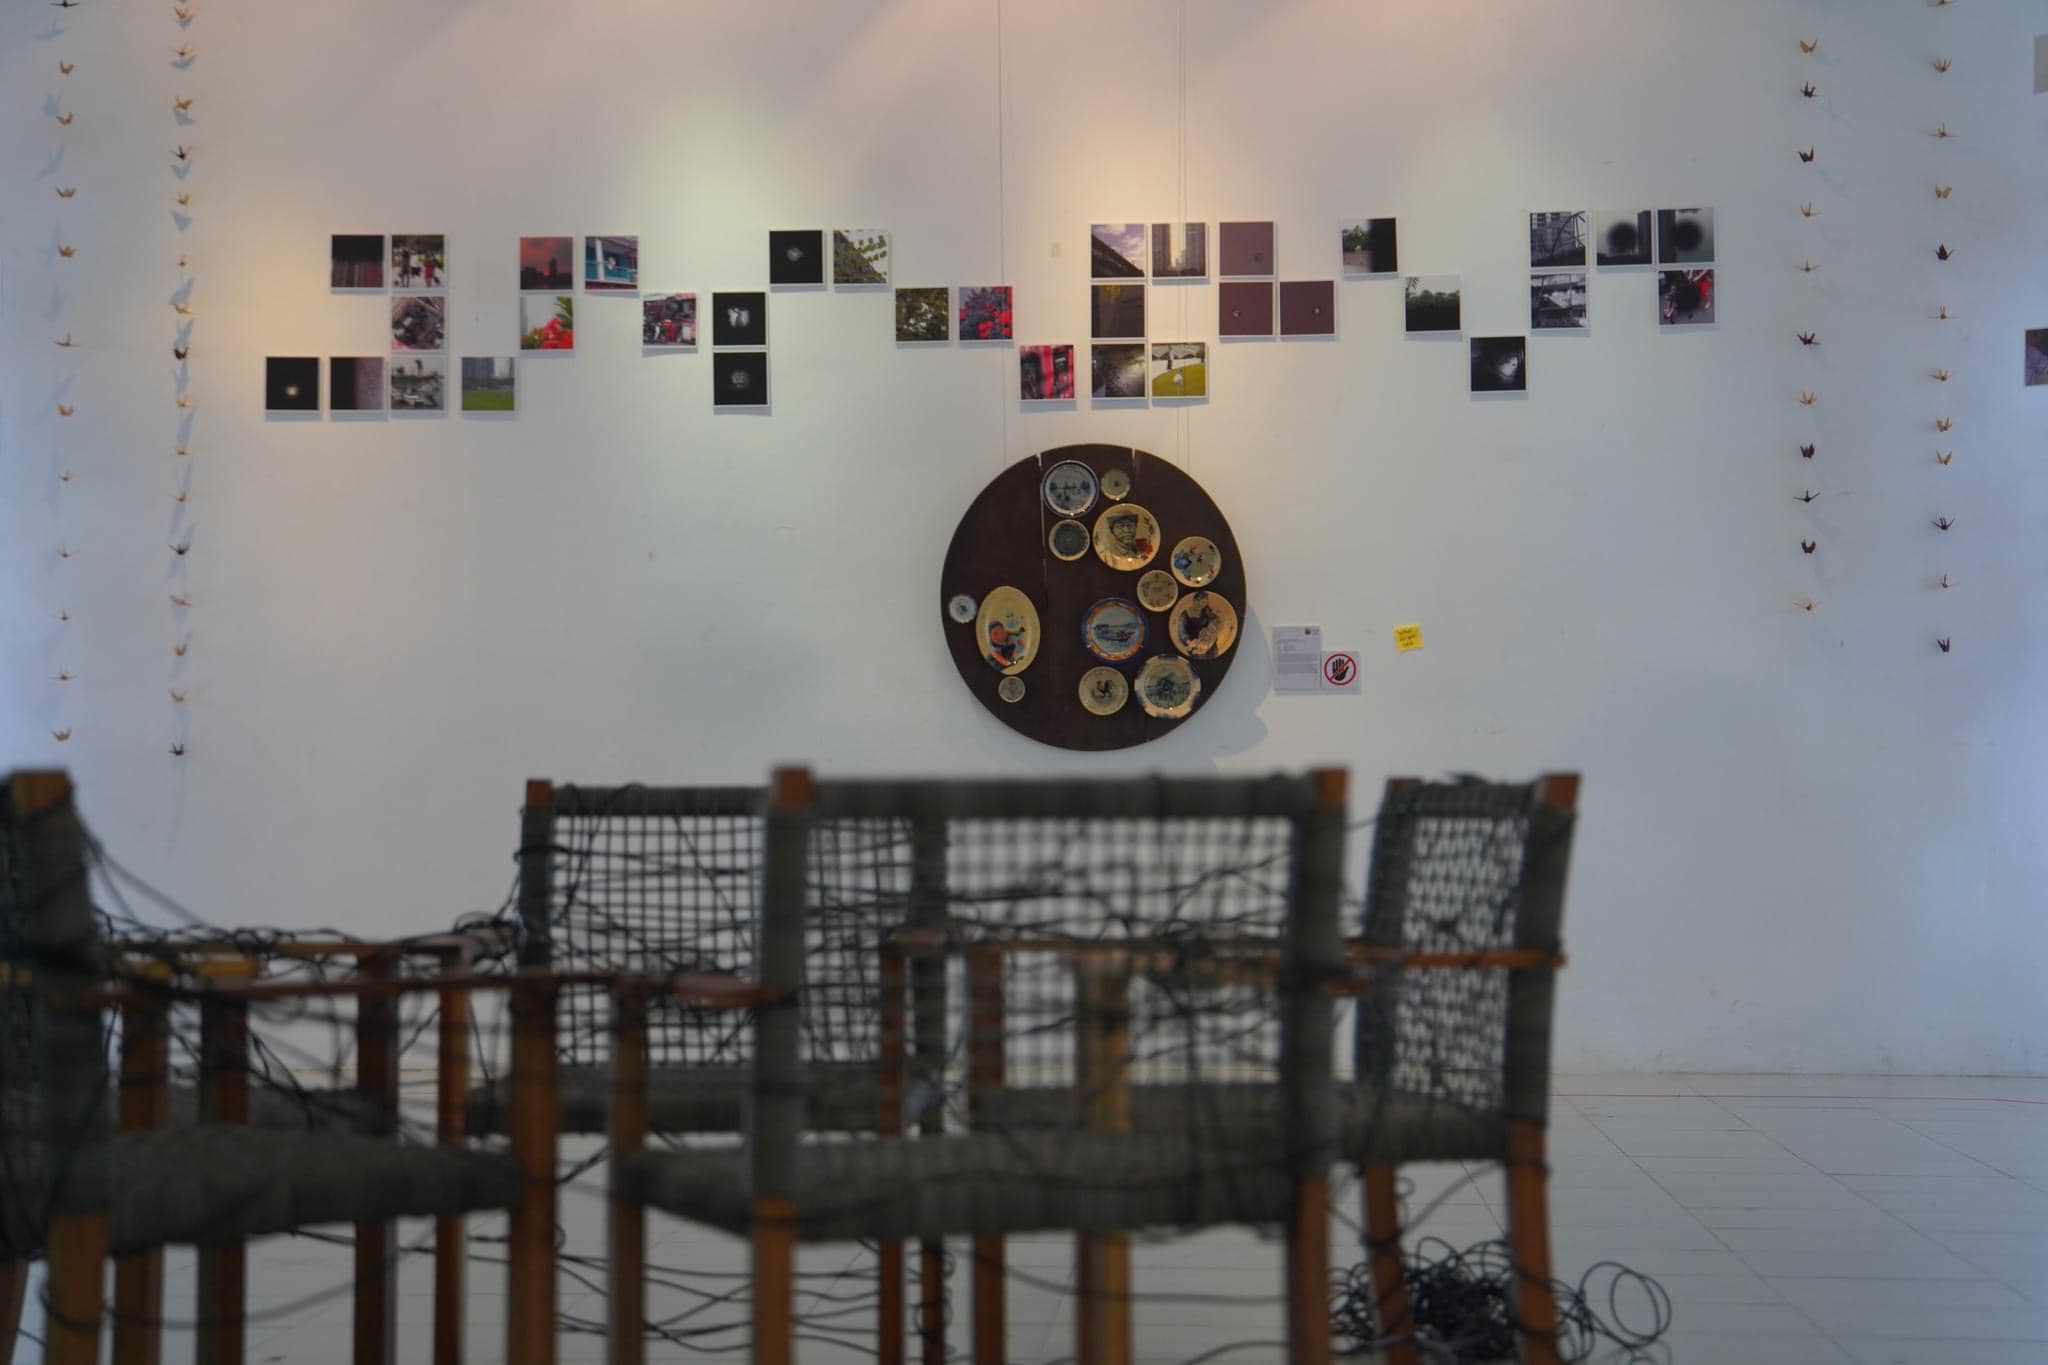 Art exhibited at Calm Exhibition by Concept Tử Tế, the top Vietnamese Branding Agency